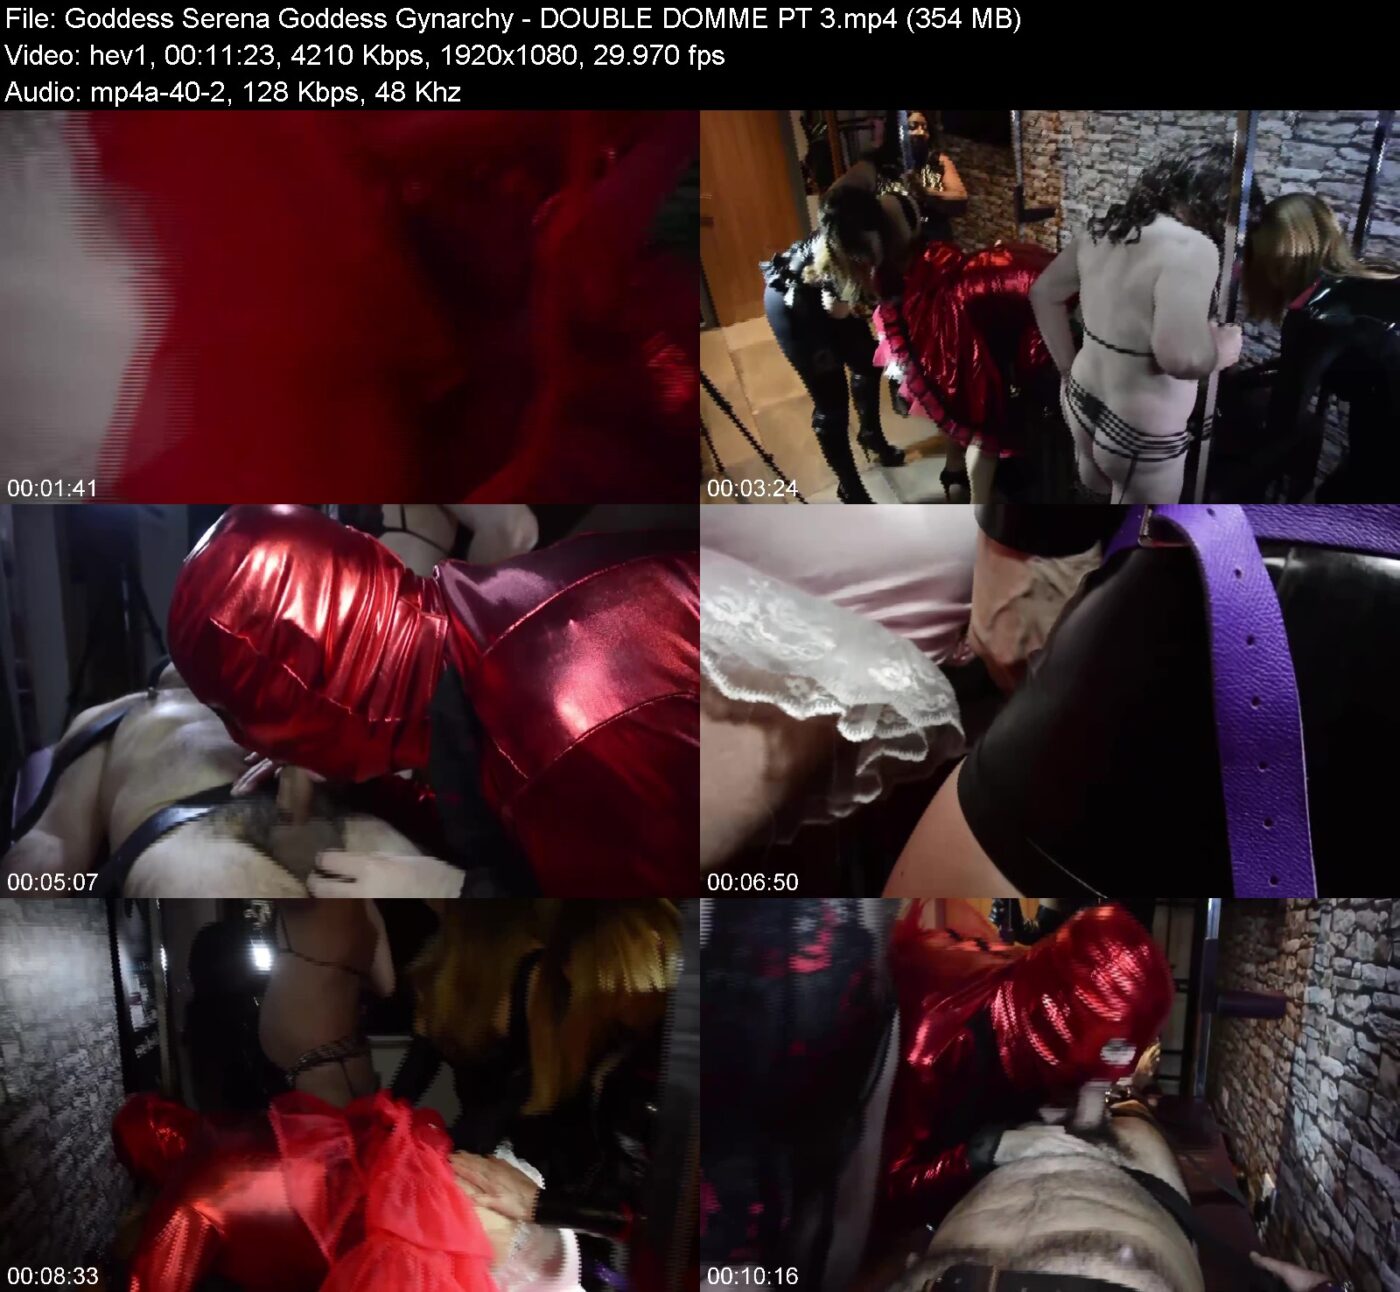 Actress: Goddess Serena Goddess Gynarchy. Title and Studio: DOUBLE DOMME PT 3